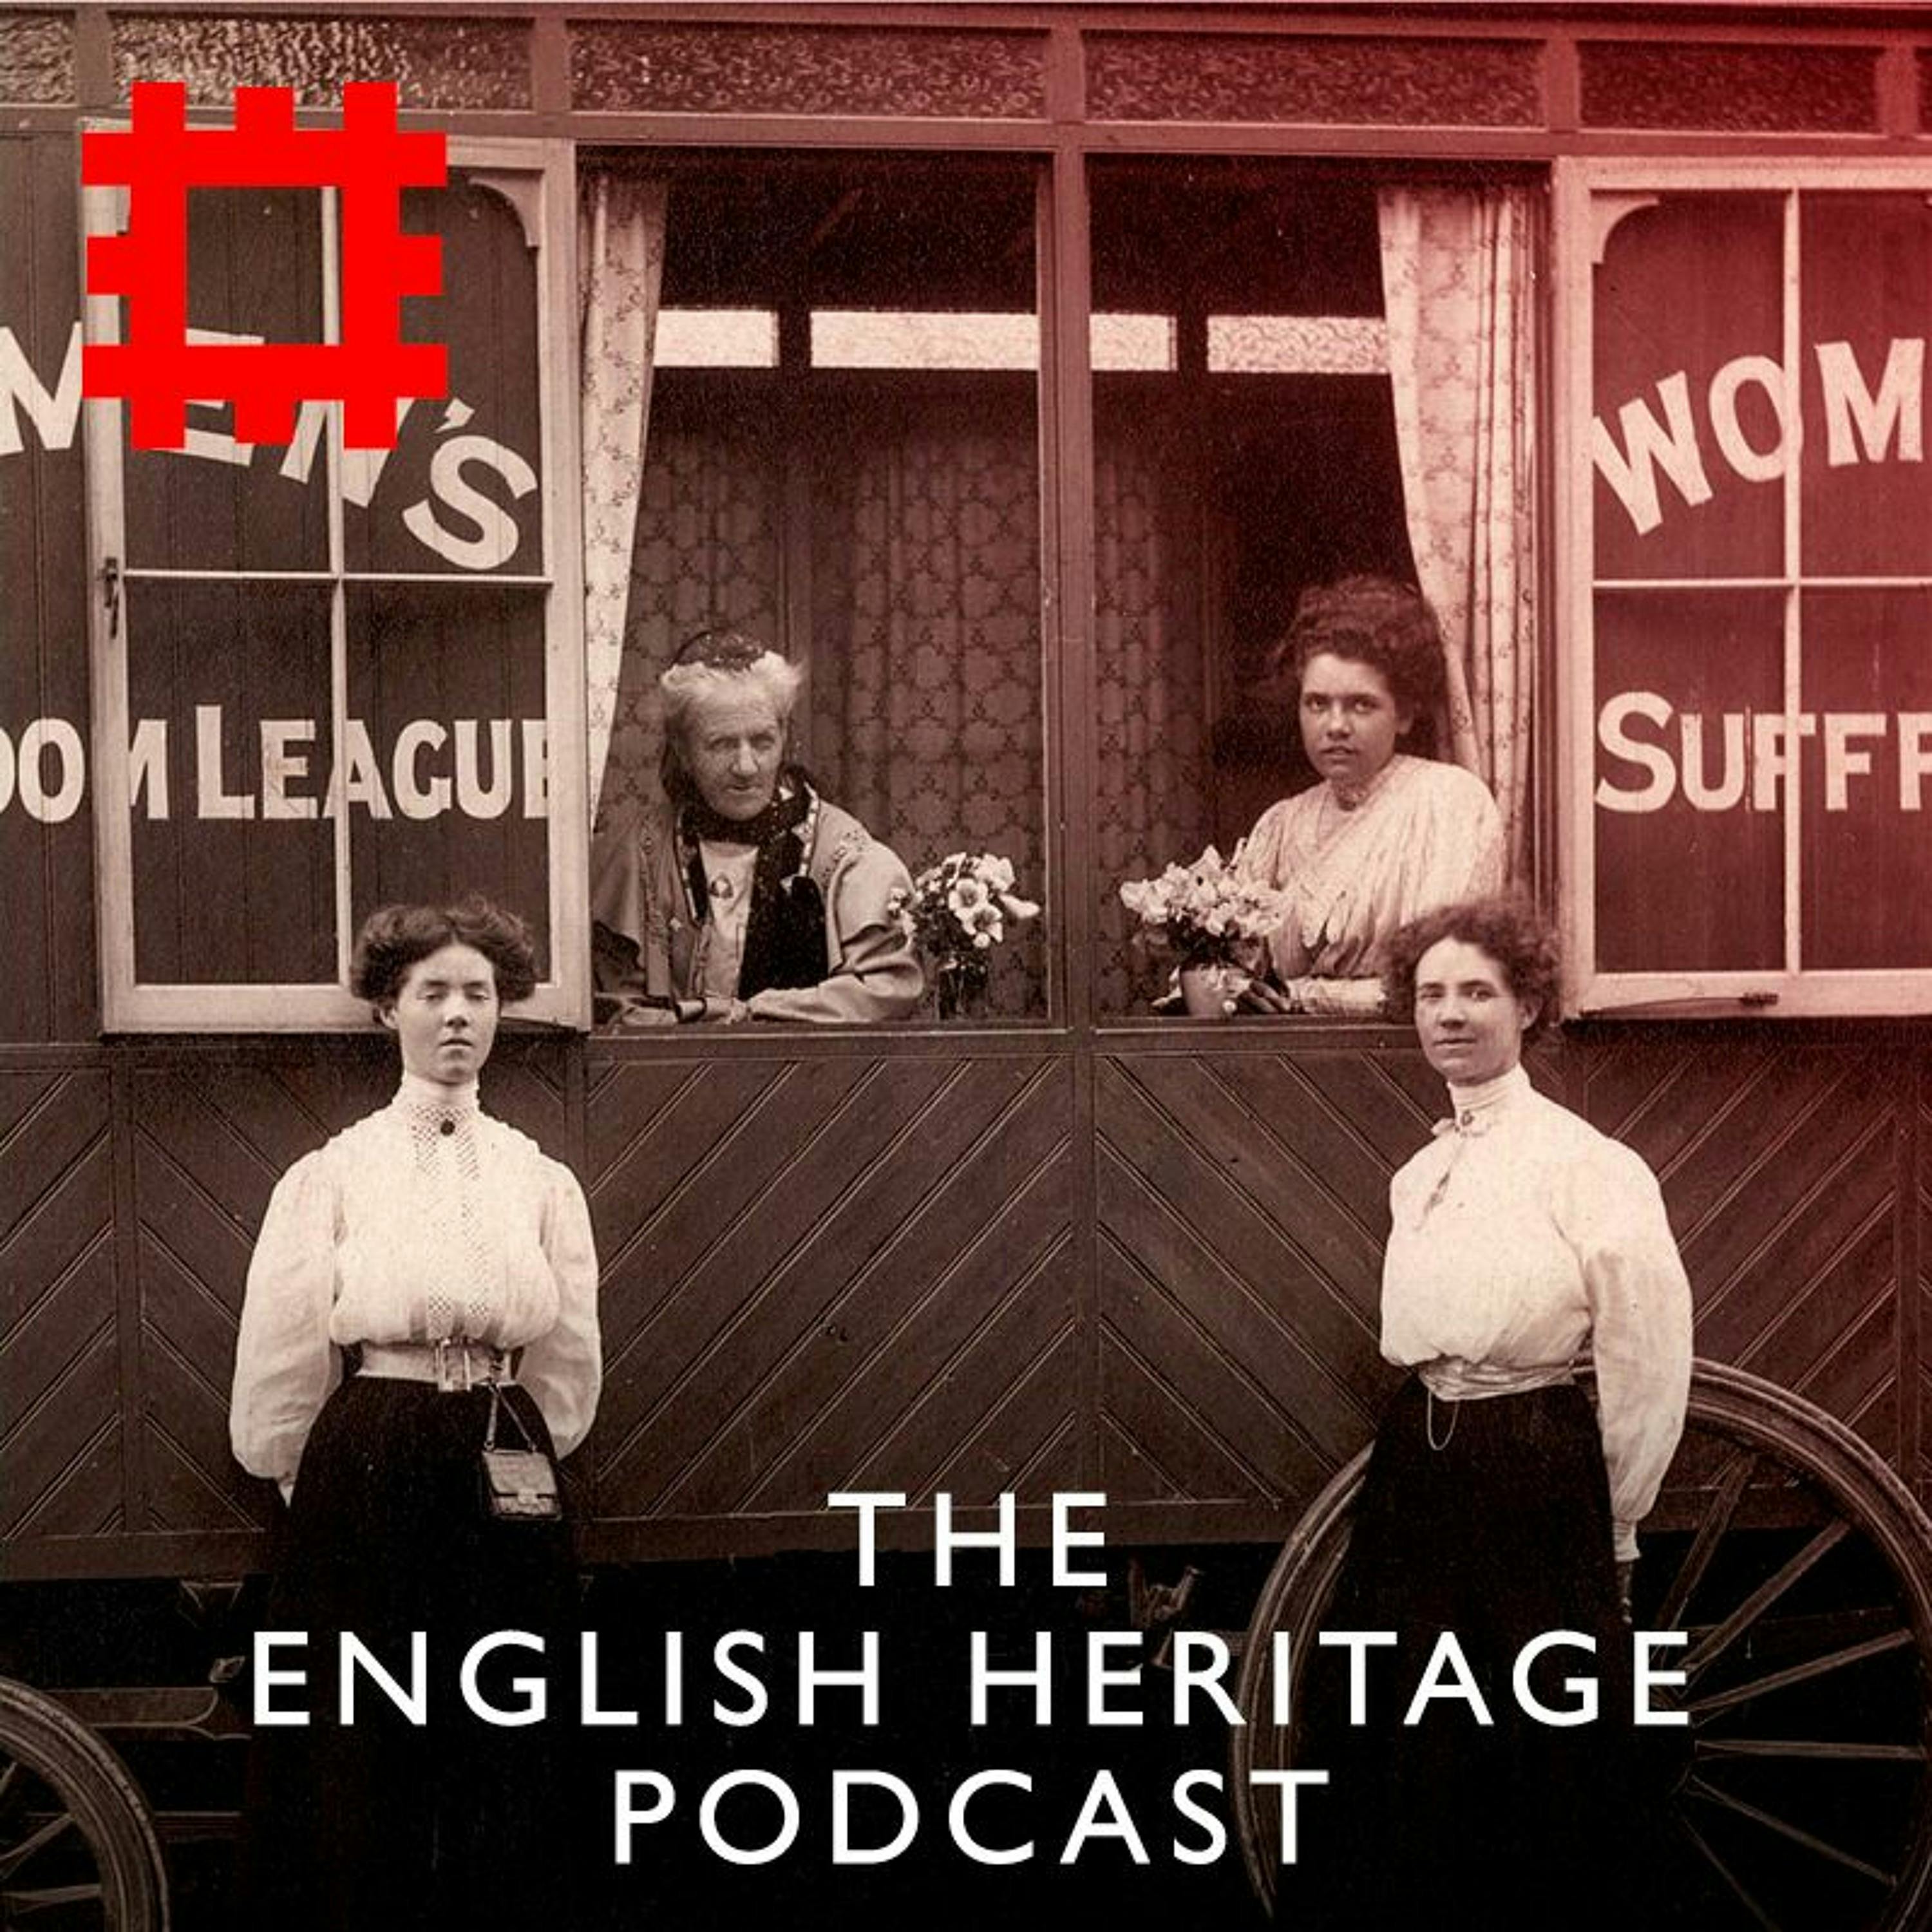 Episode 233 - Celebrating the Women’s Freedom League with our 1,000th blue plaque